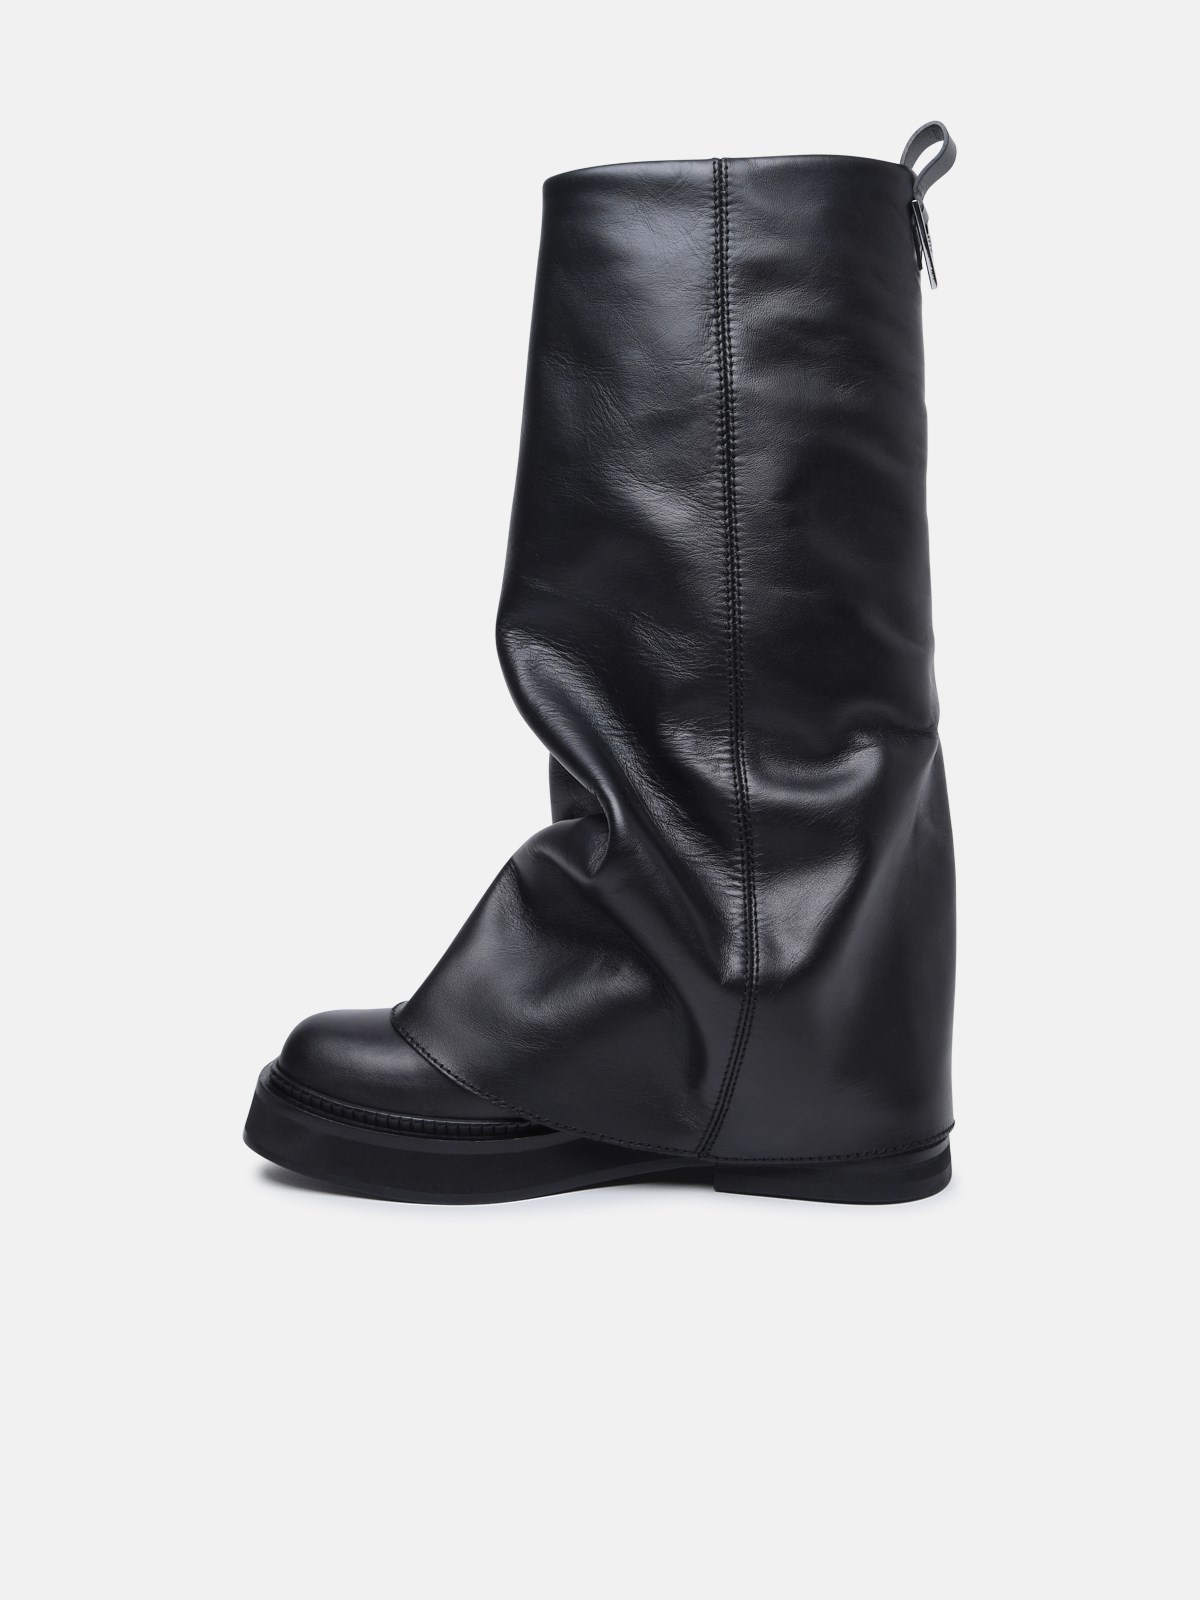 'ROBIN' BLACK LEATHER COMBAT BOOTS - 3